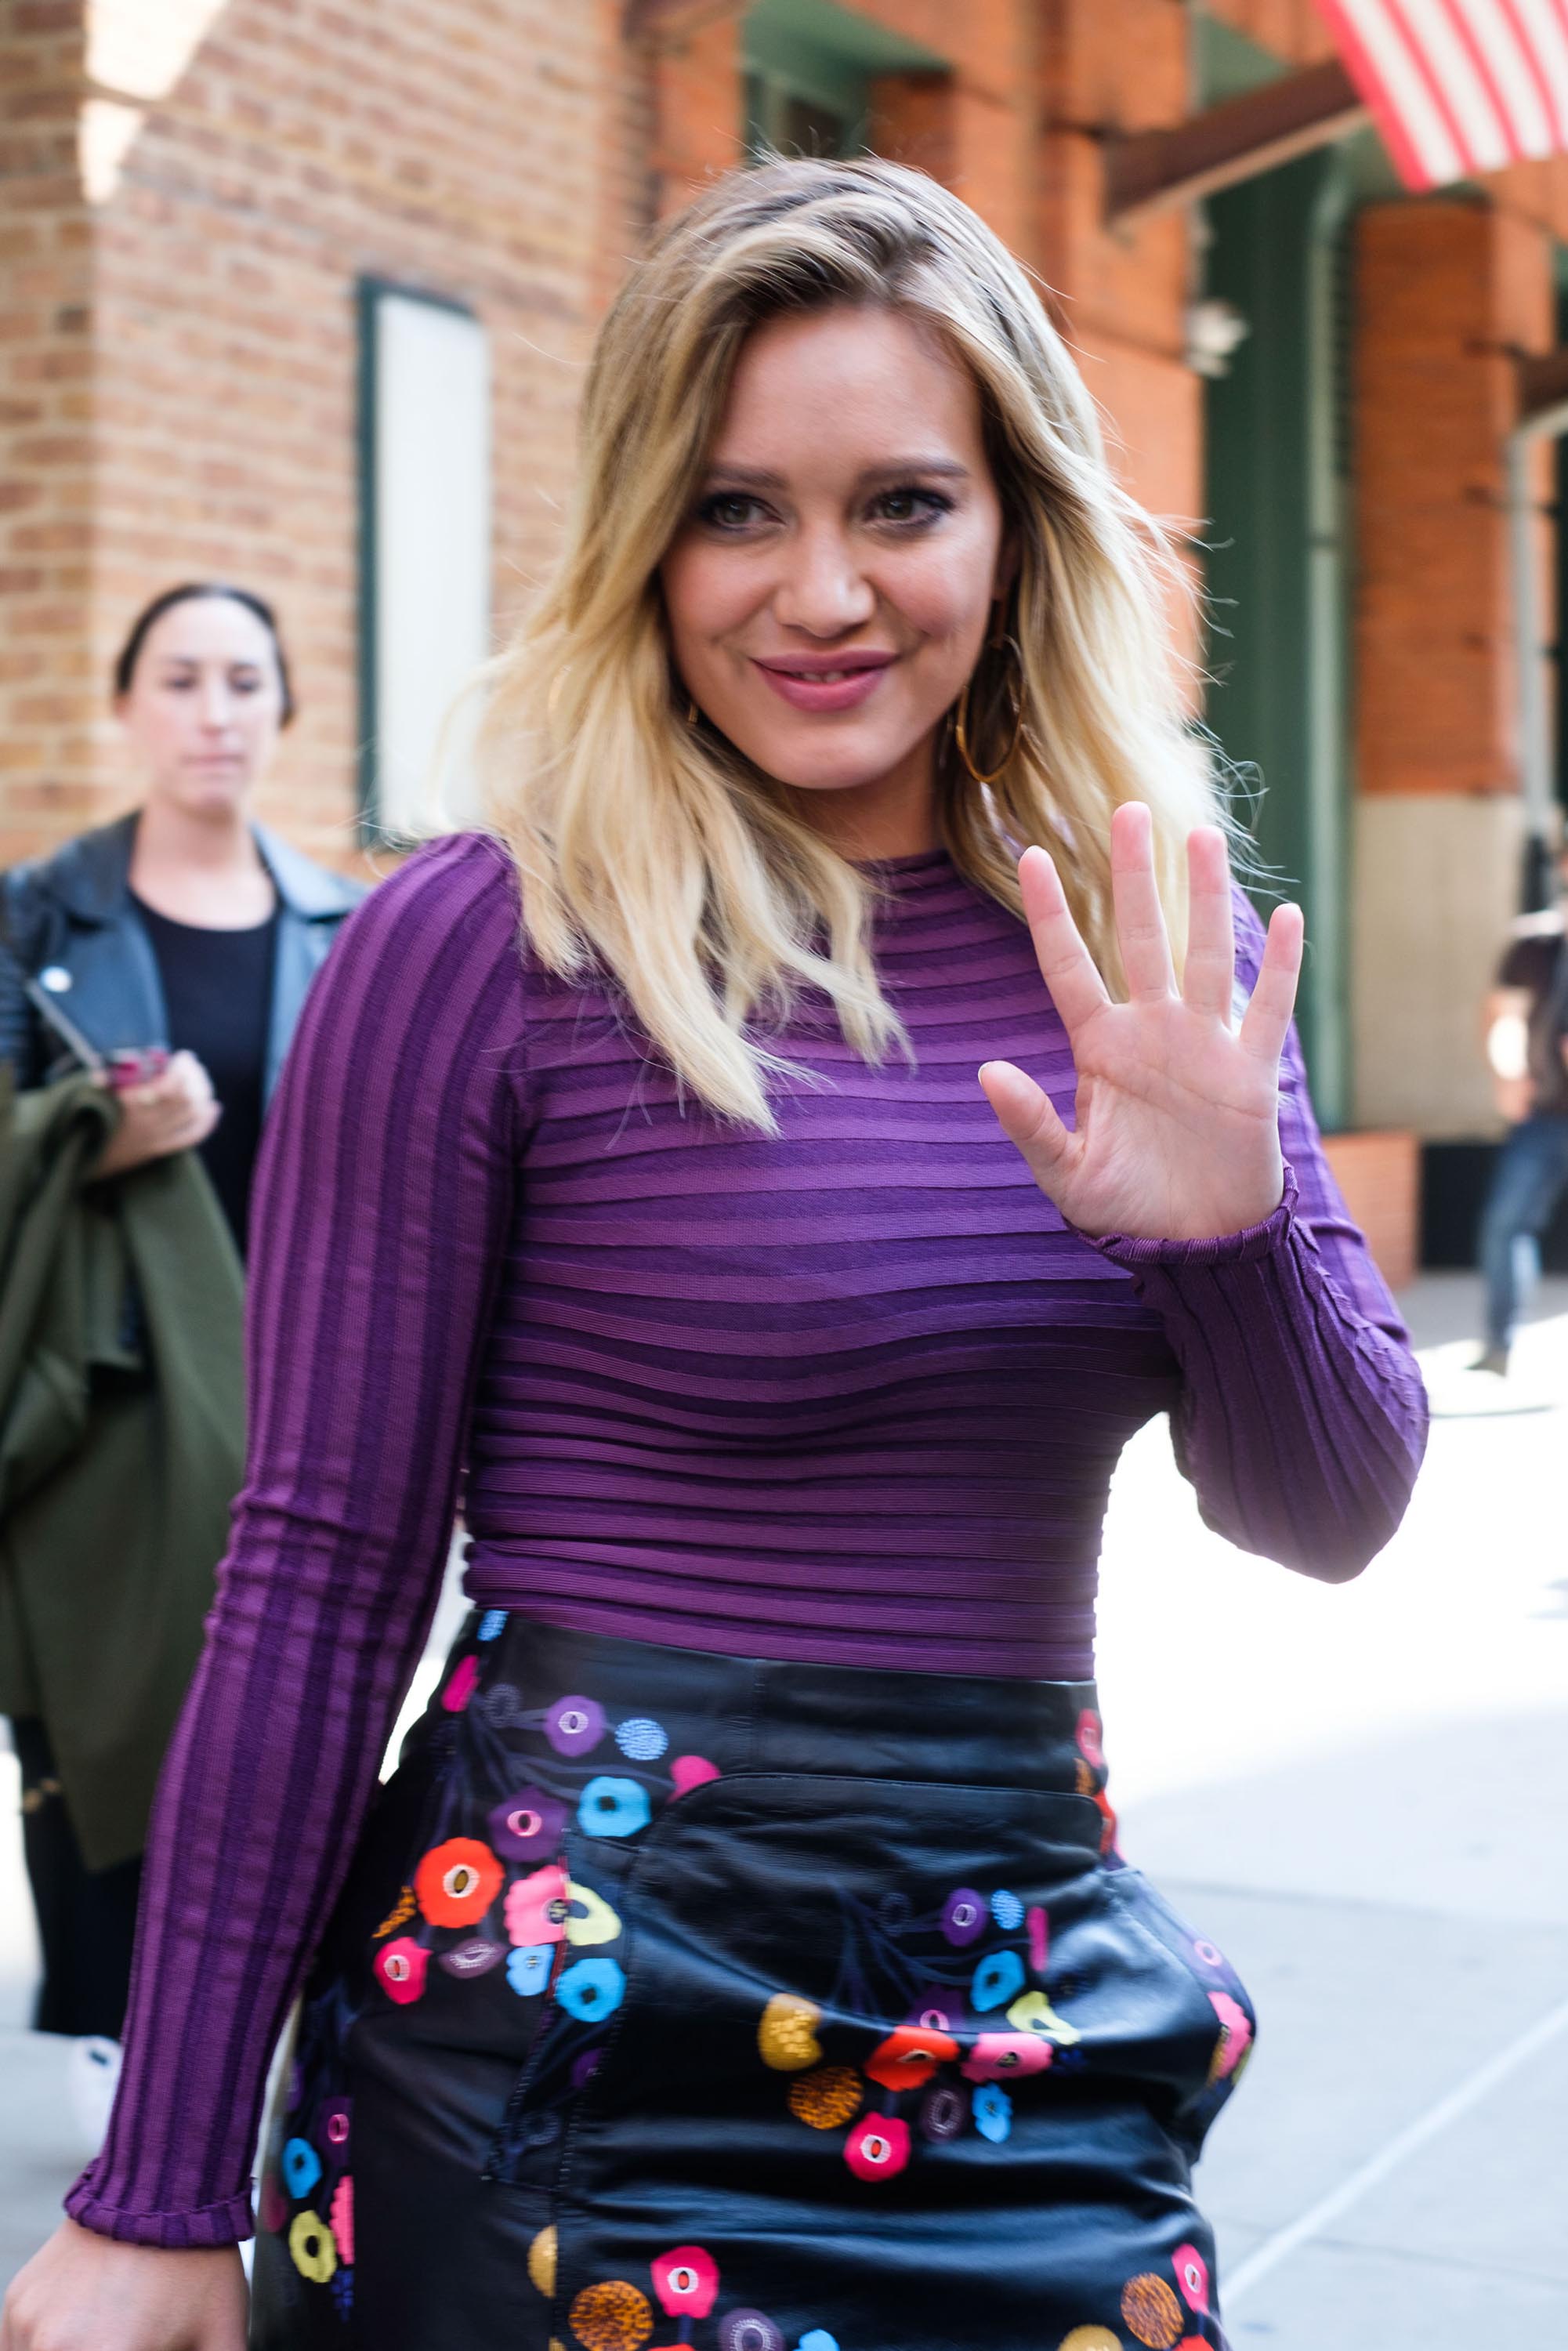 Hilary Duff attends The Build Series Presents The Cast Of Younger